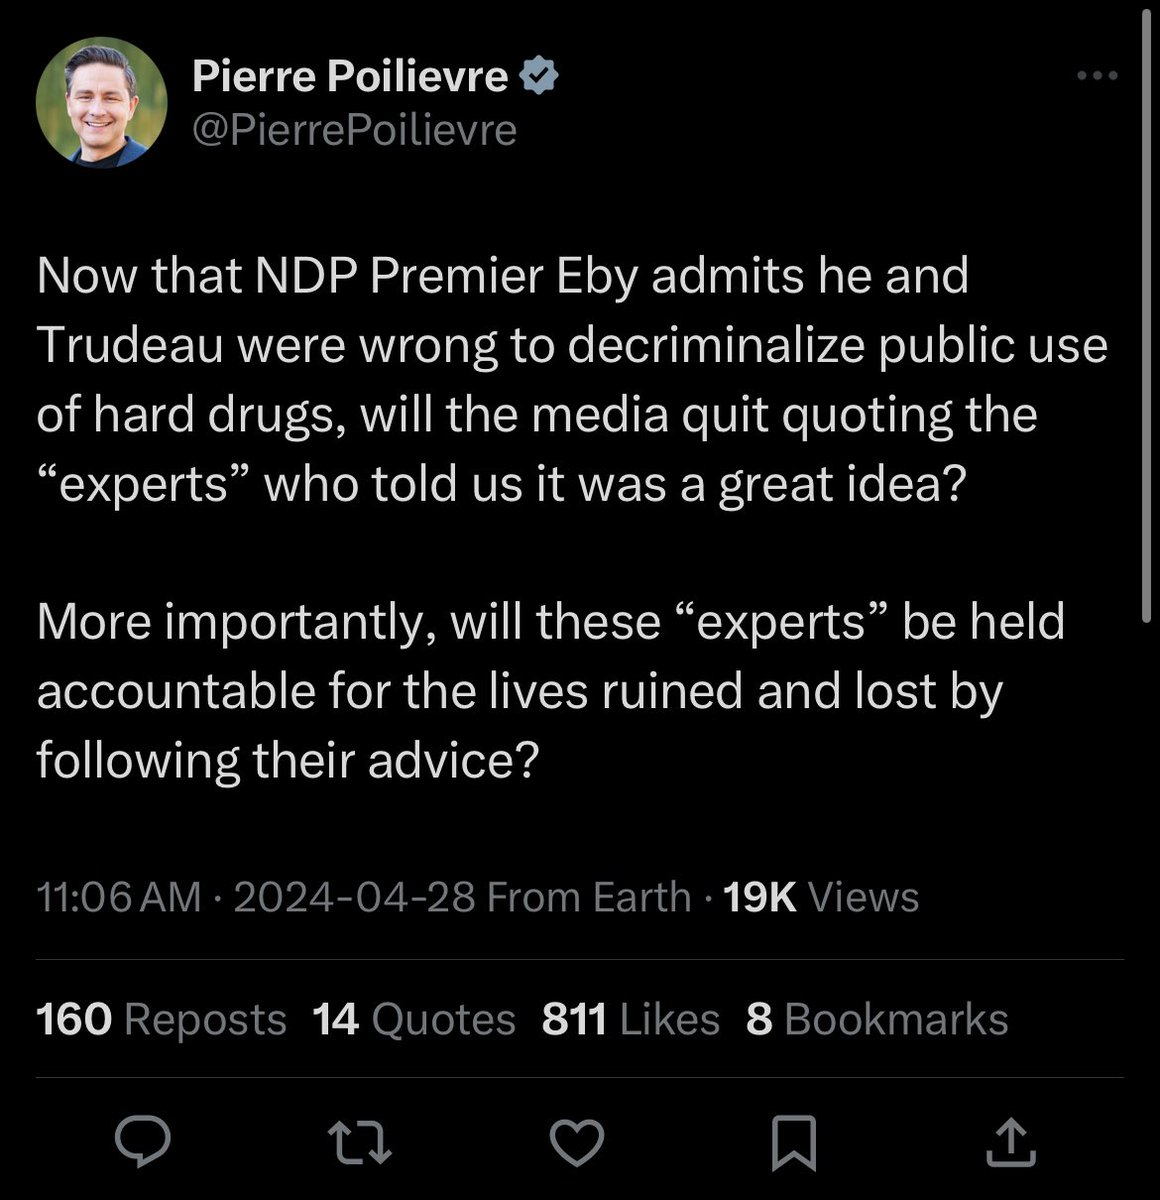 Here’s Mr. Evidence-Based citing a politician to school Canadians on the biopsychosocial nature of addictions. Prohibition failed throughout the 20th century. Now, Pee Pee, the conservative traditionalist, wants to make the war on drugs great again? Insanity personified.